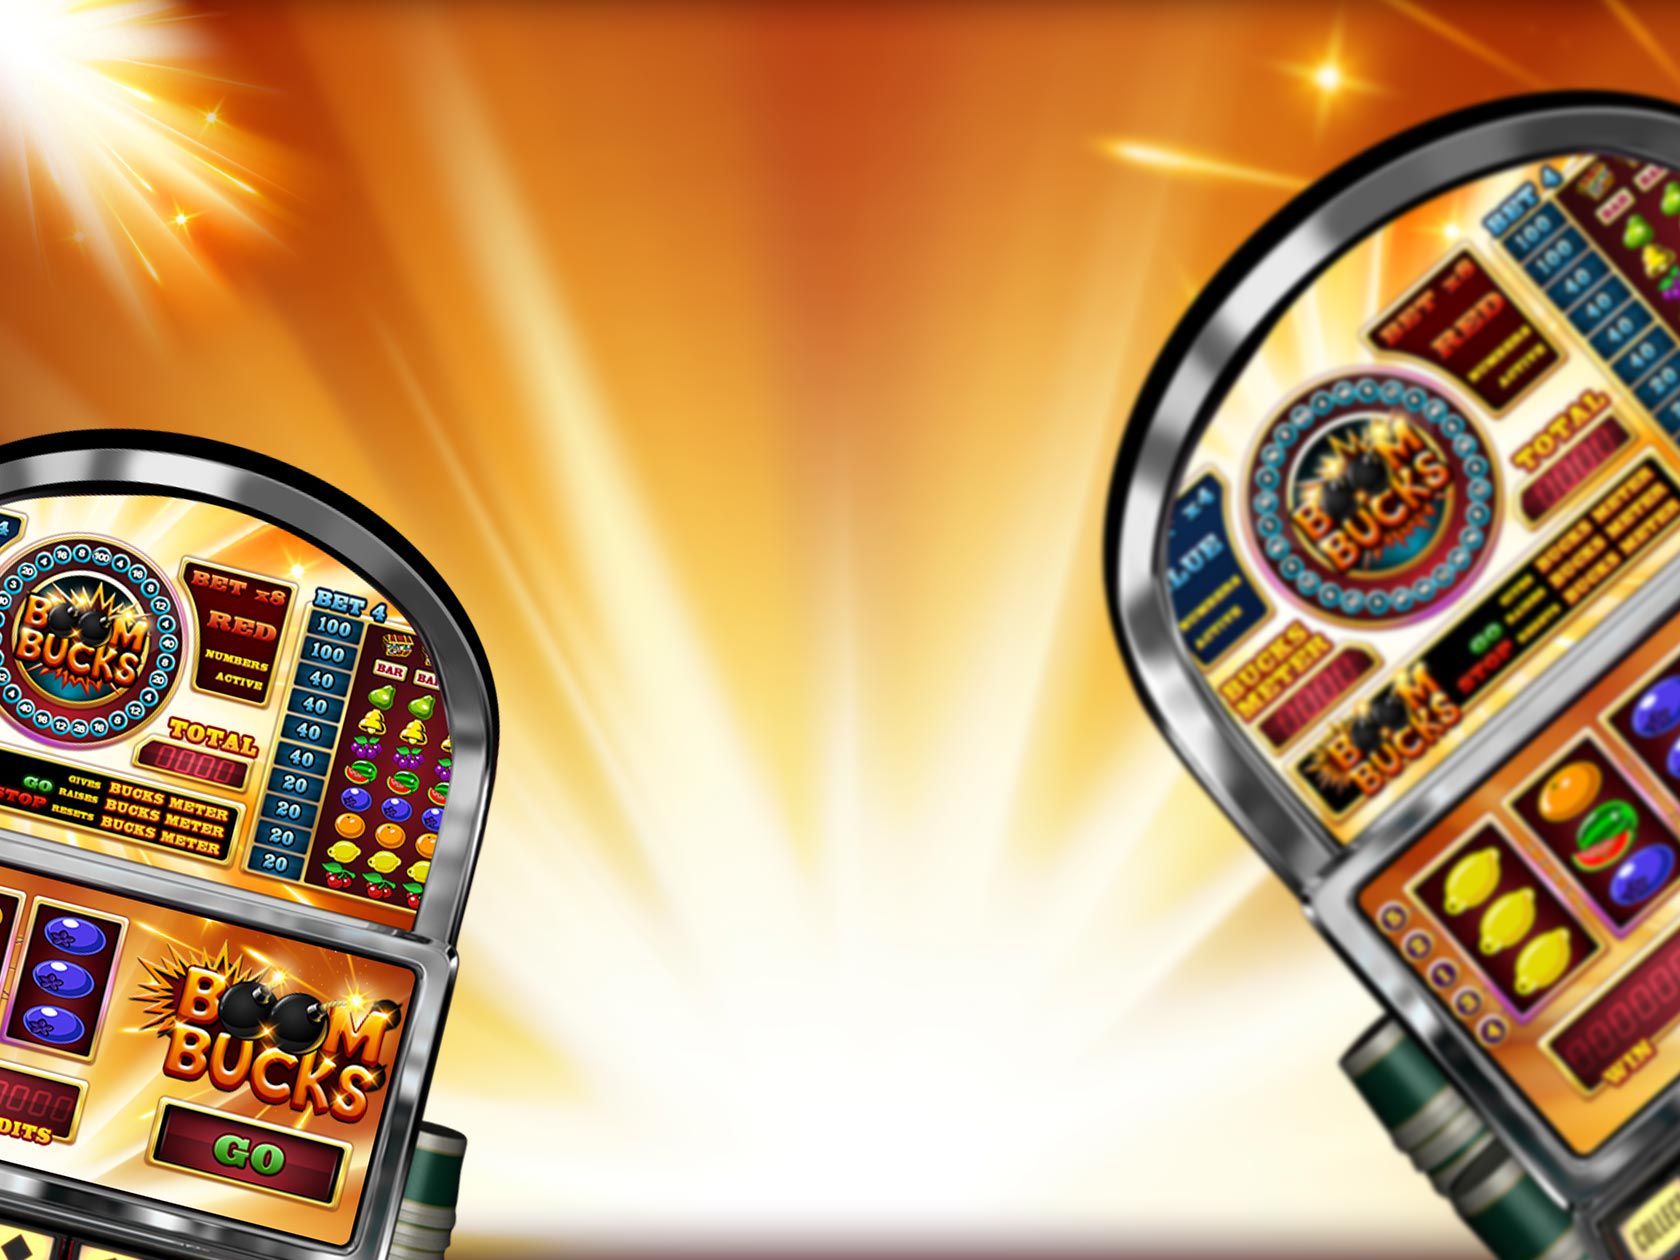 Man Reveals The Trick To Get Millions Out Of Slot Machines